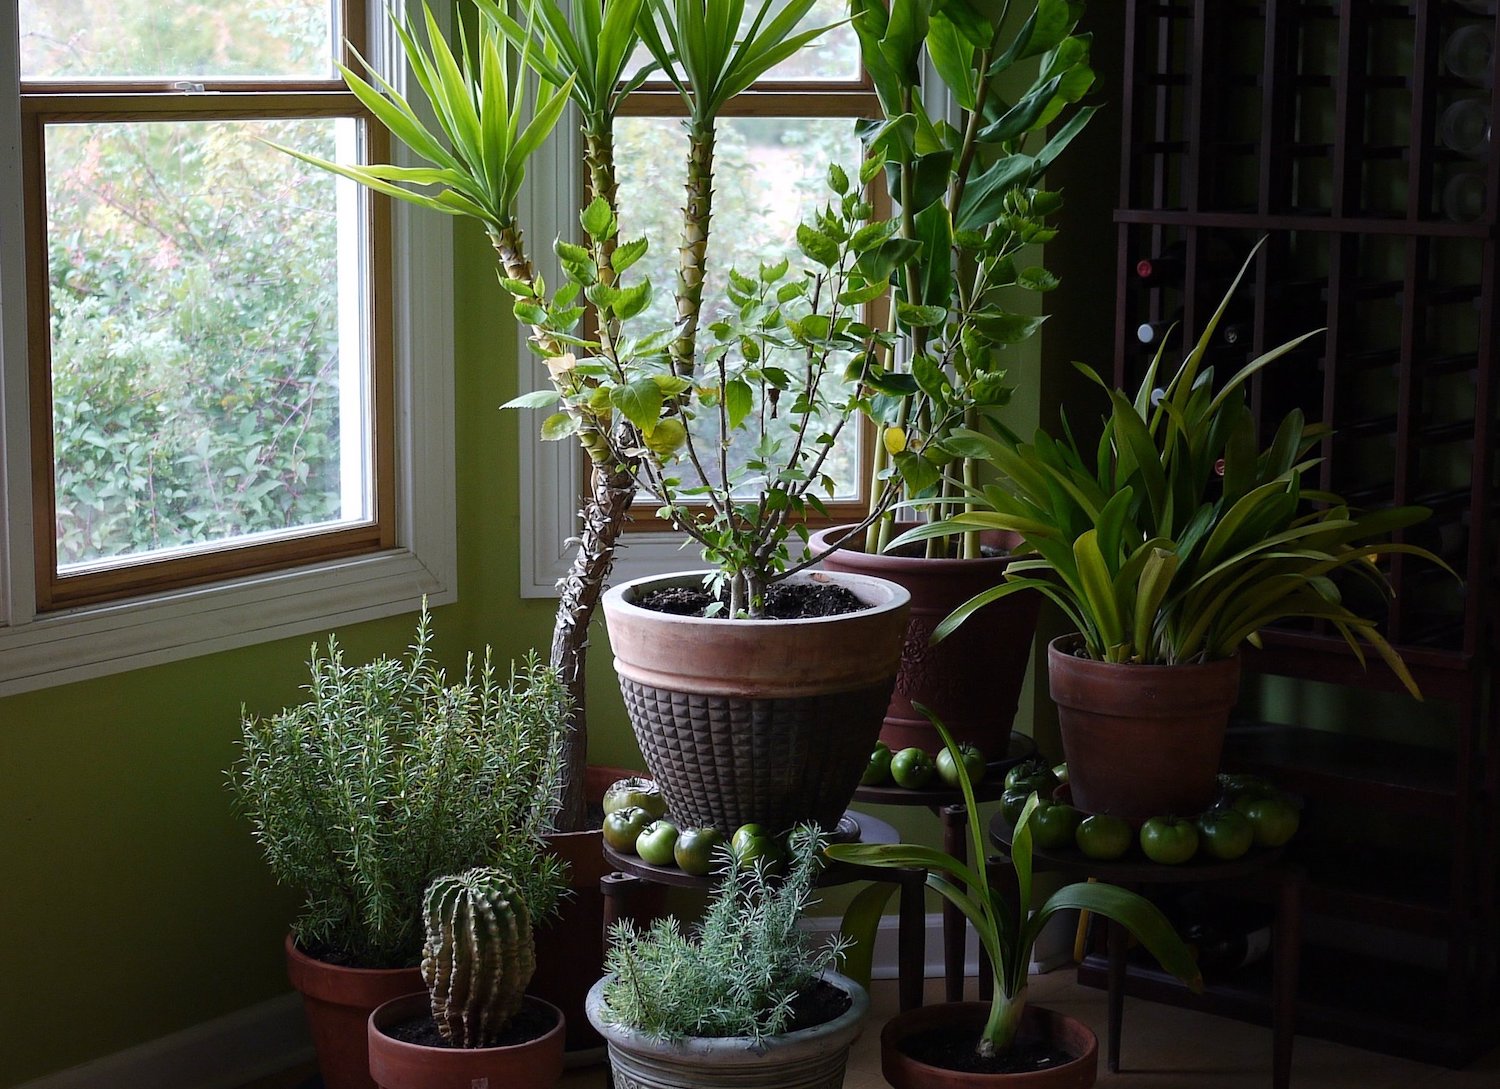 A variety of houseplants decorated in someones home